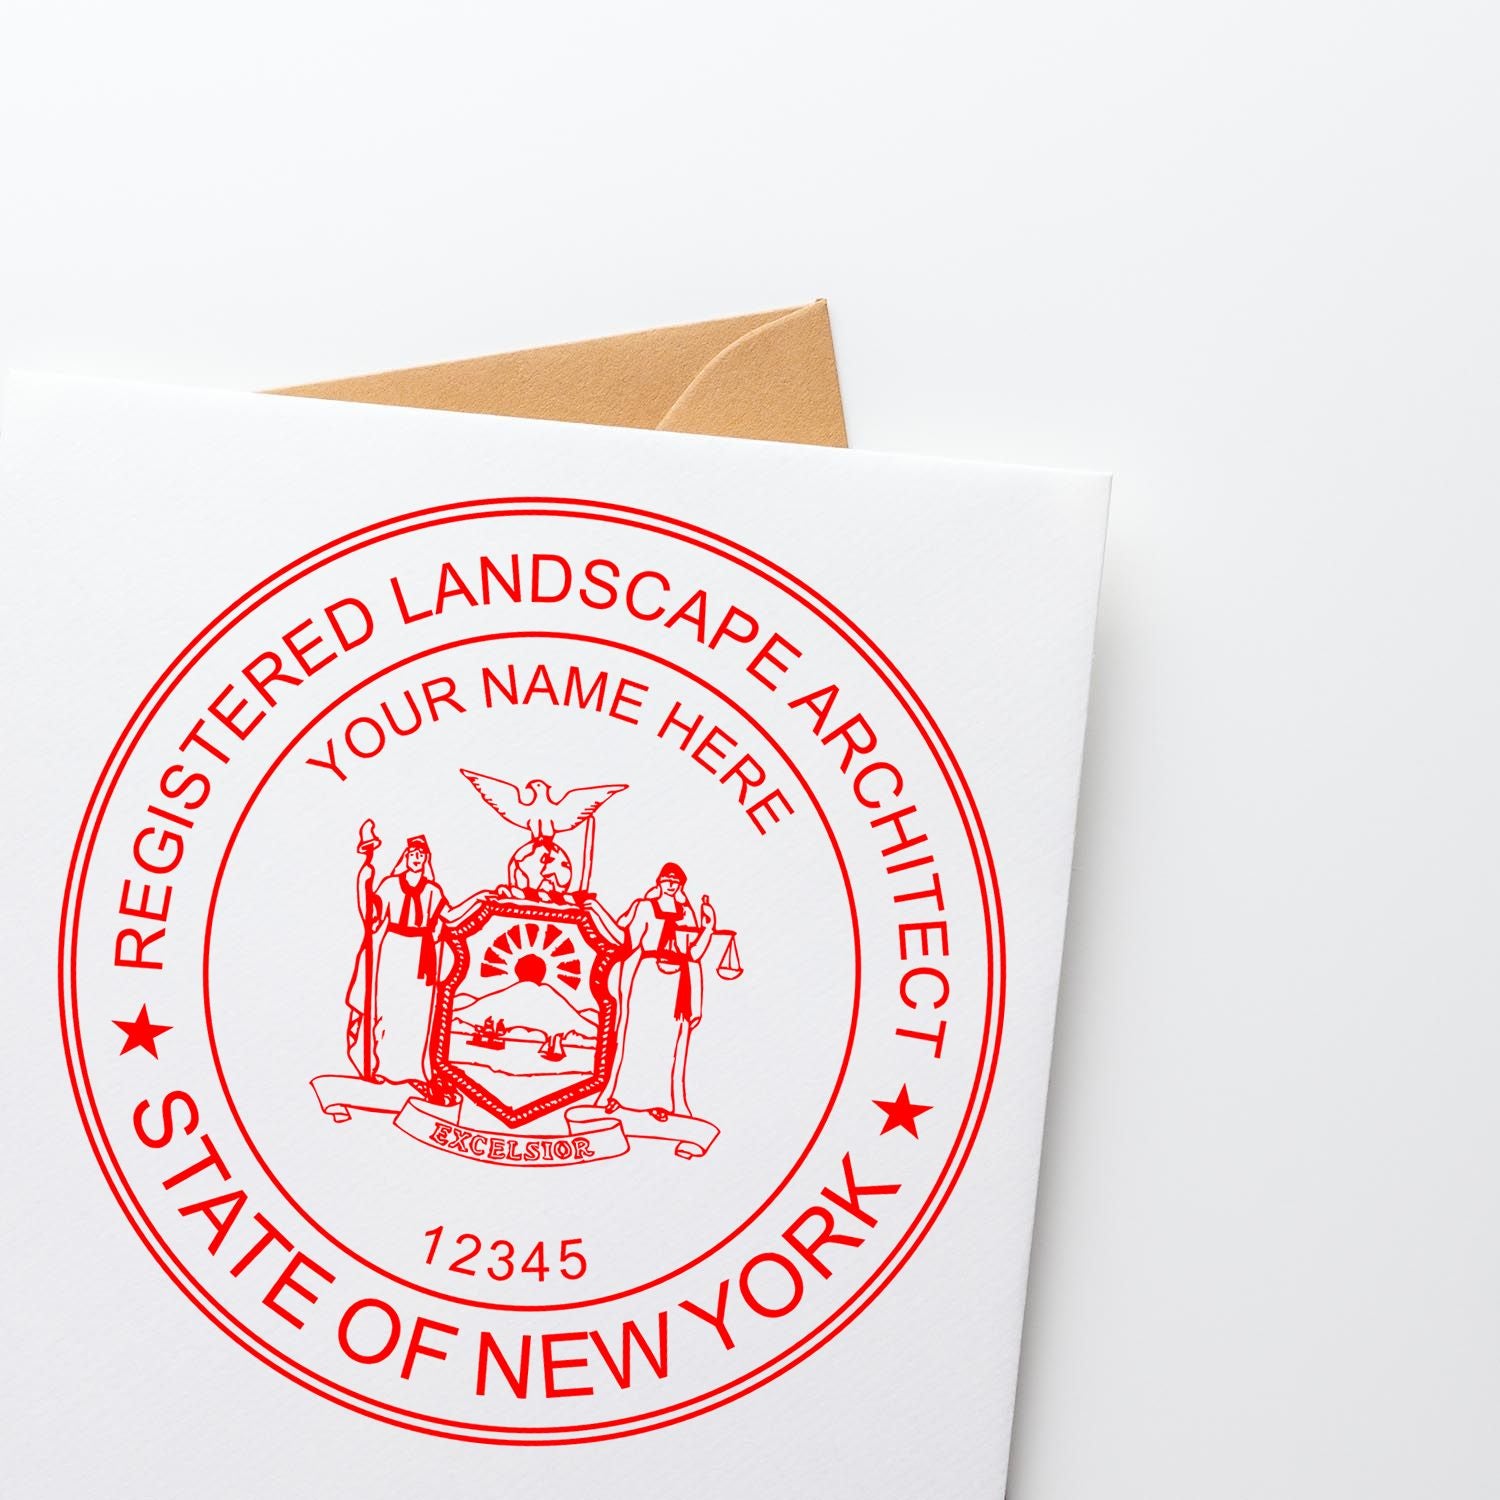 An alternative view of the Premium MaxLight Pre-Inked New York Landscape Architectural Stamp stamped on a sheet of paper showing the image in use